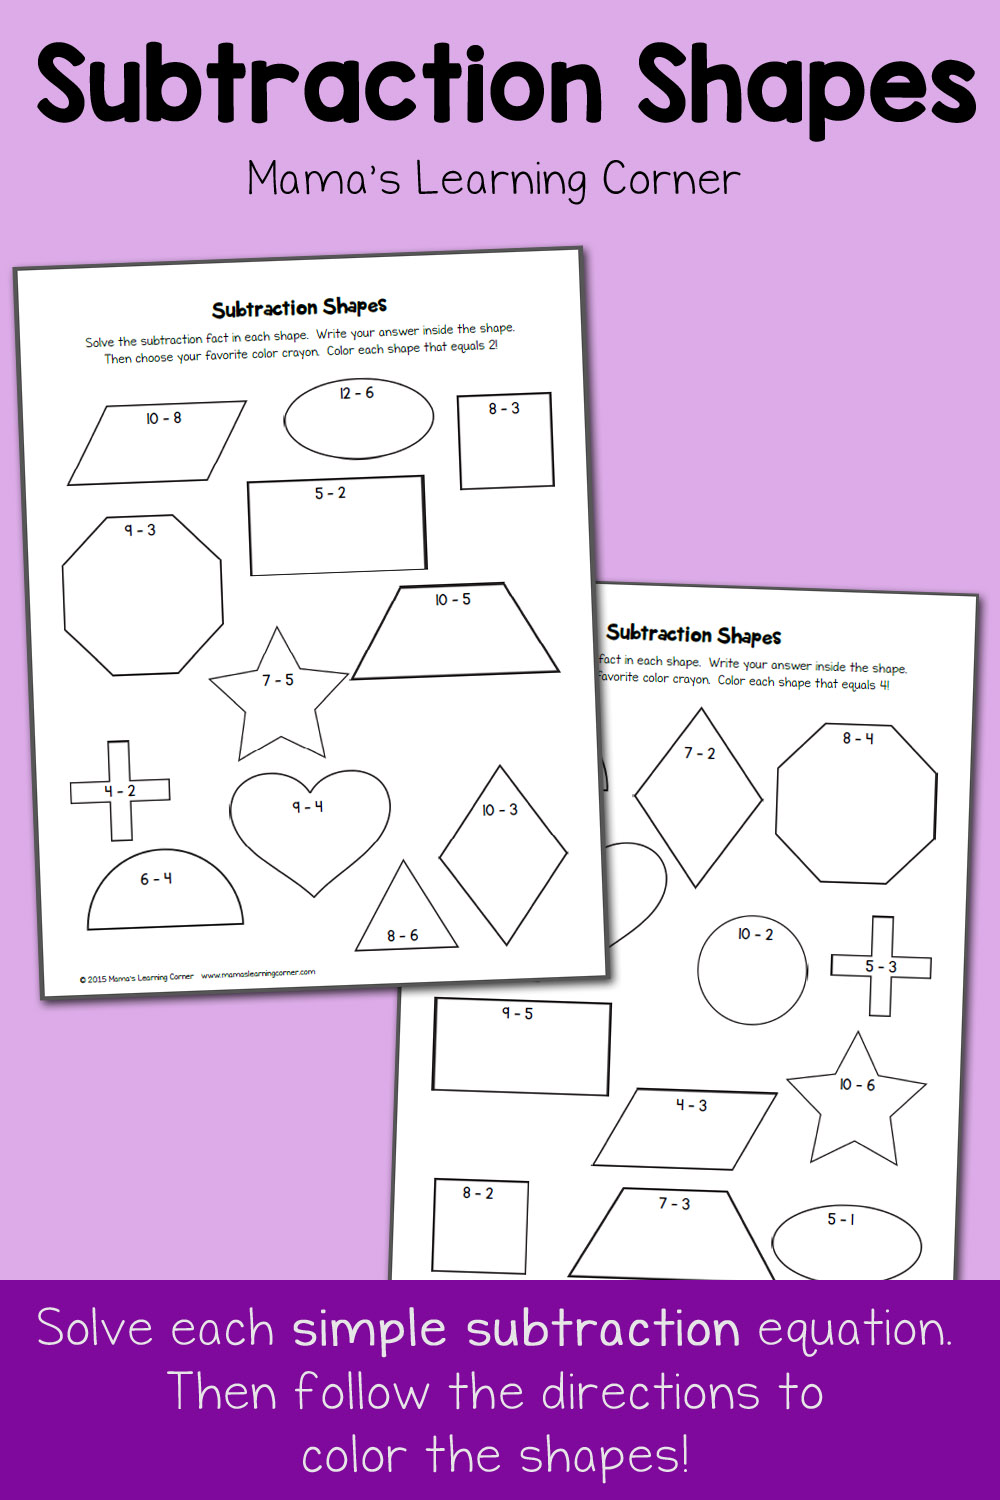 Subtraction Shapes: Free Subtraction Worksheets - Mamas Learning Corner